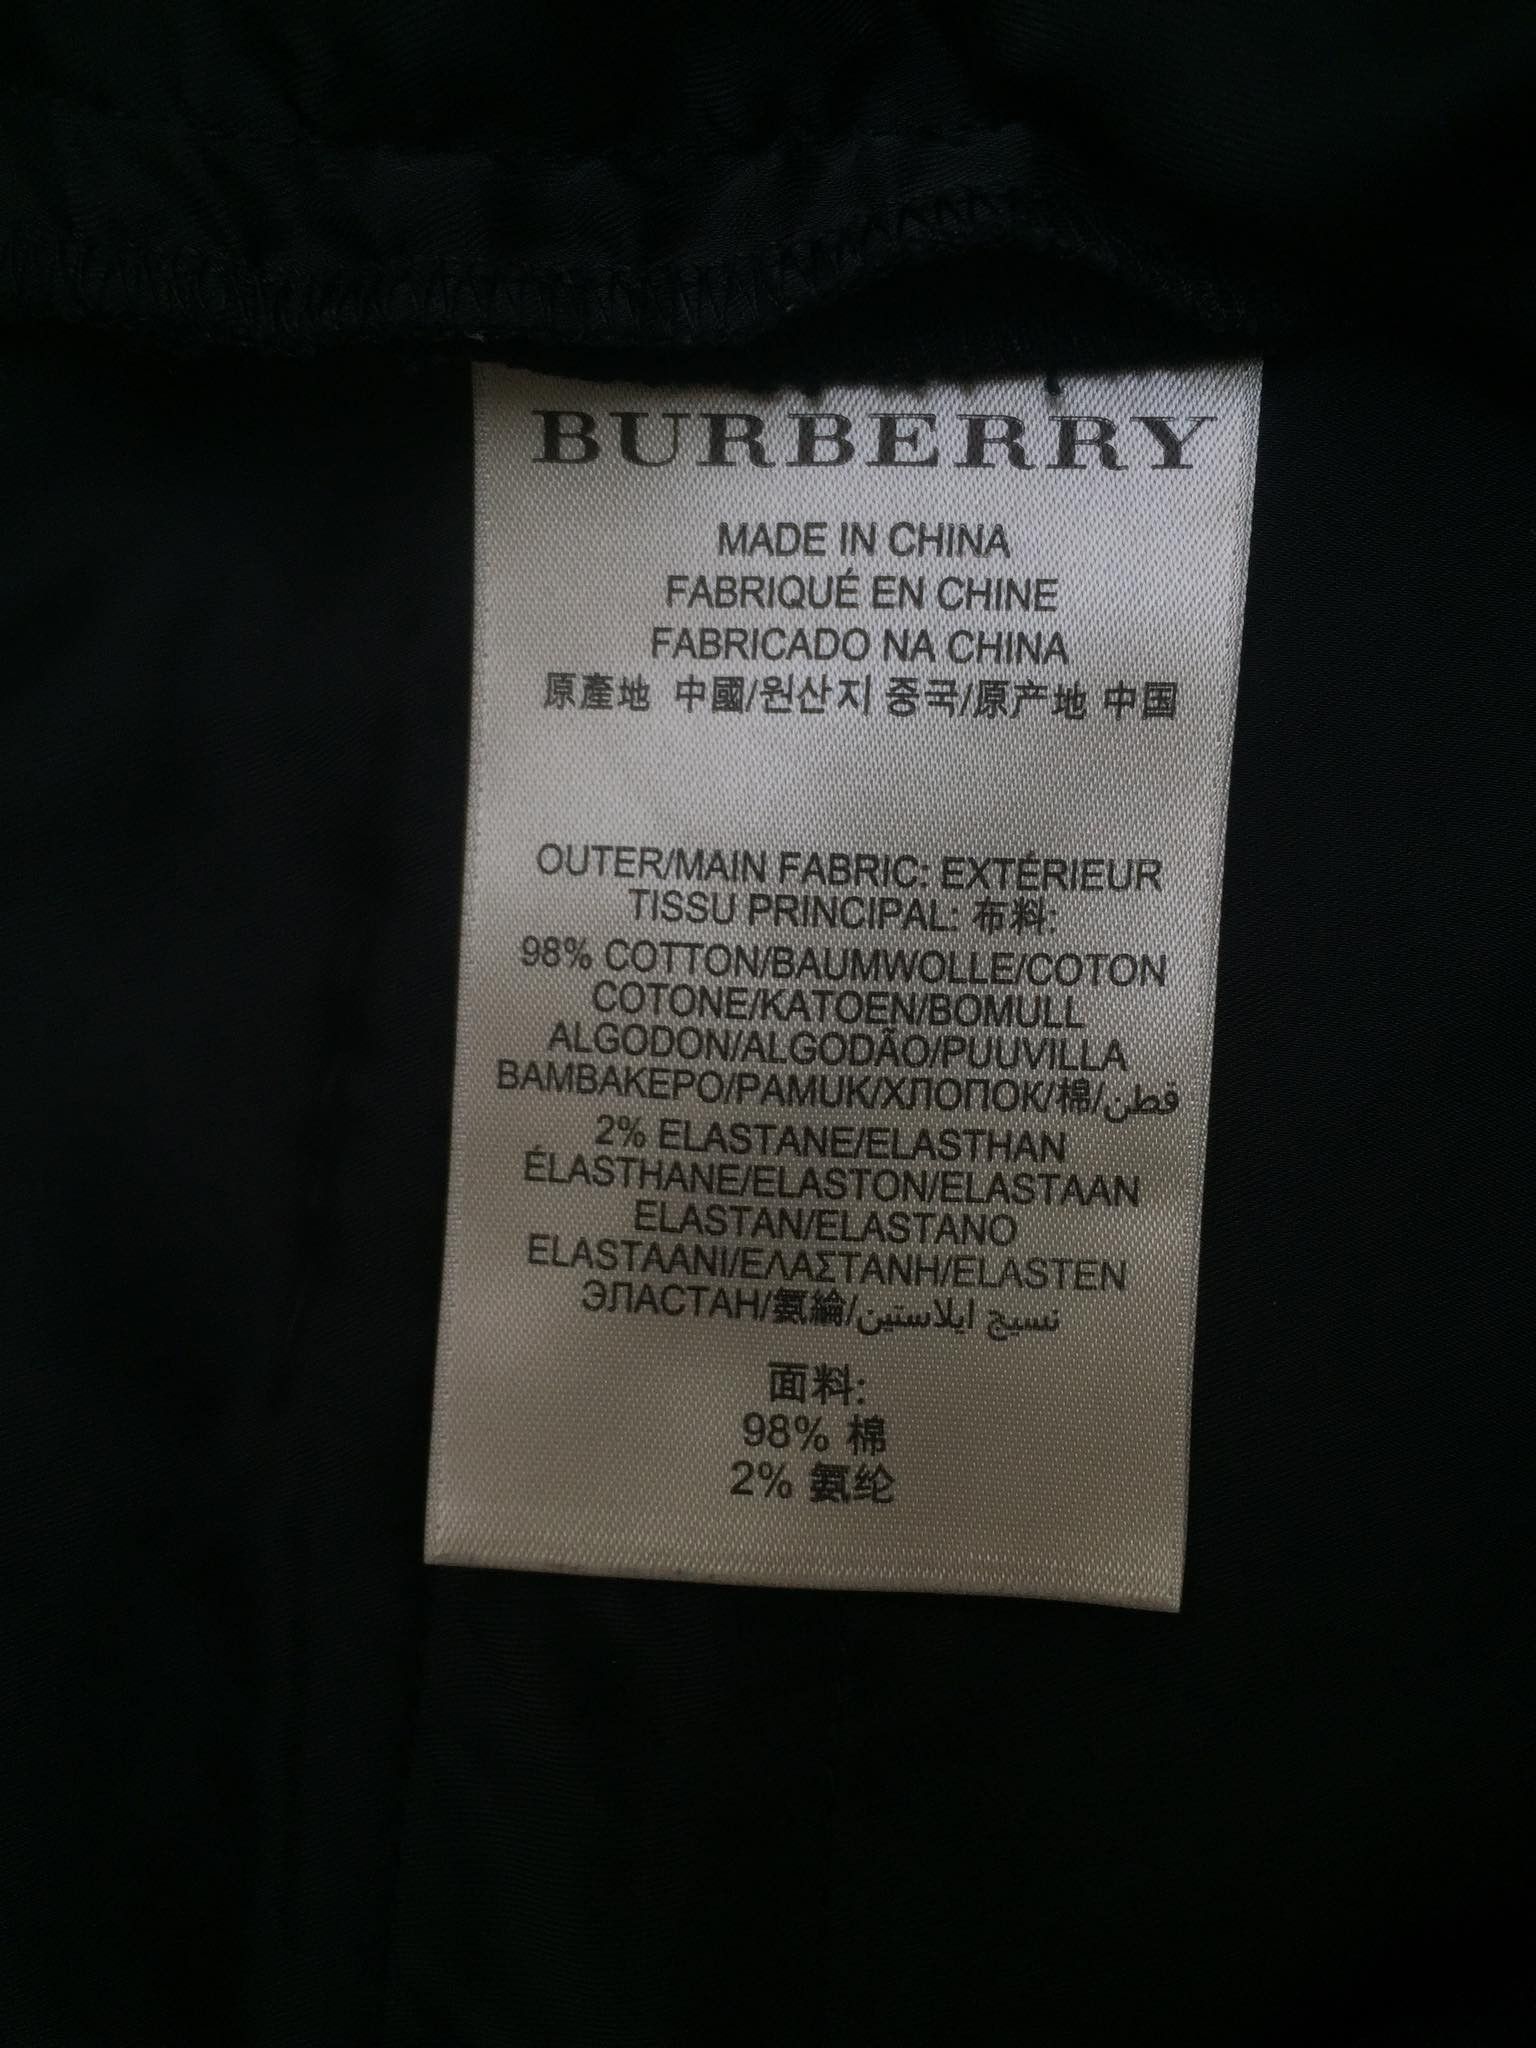 Burberry Burberry Trousers Size US 26 / EU 42 - 3 Preview